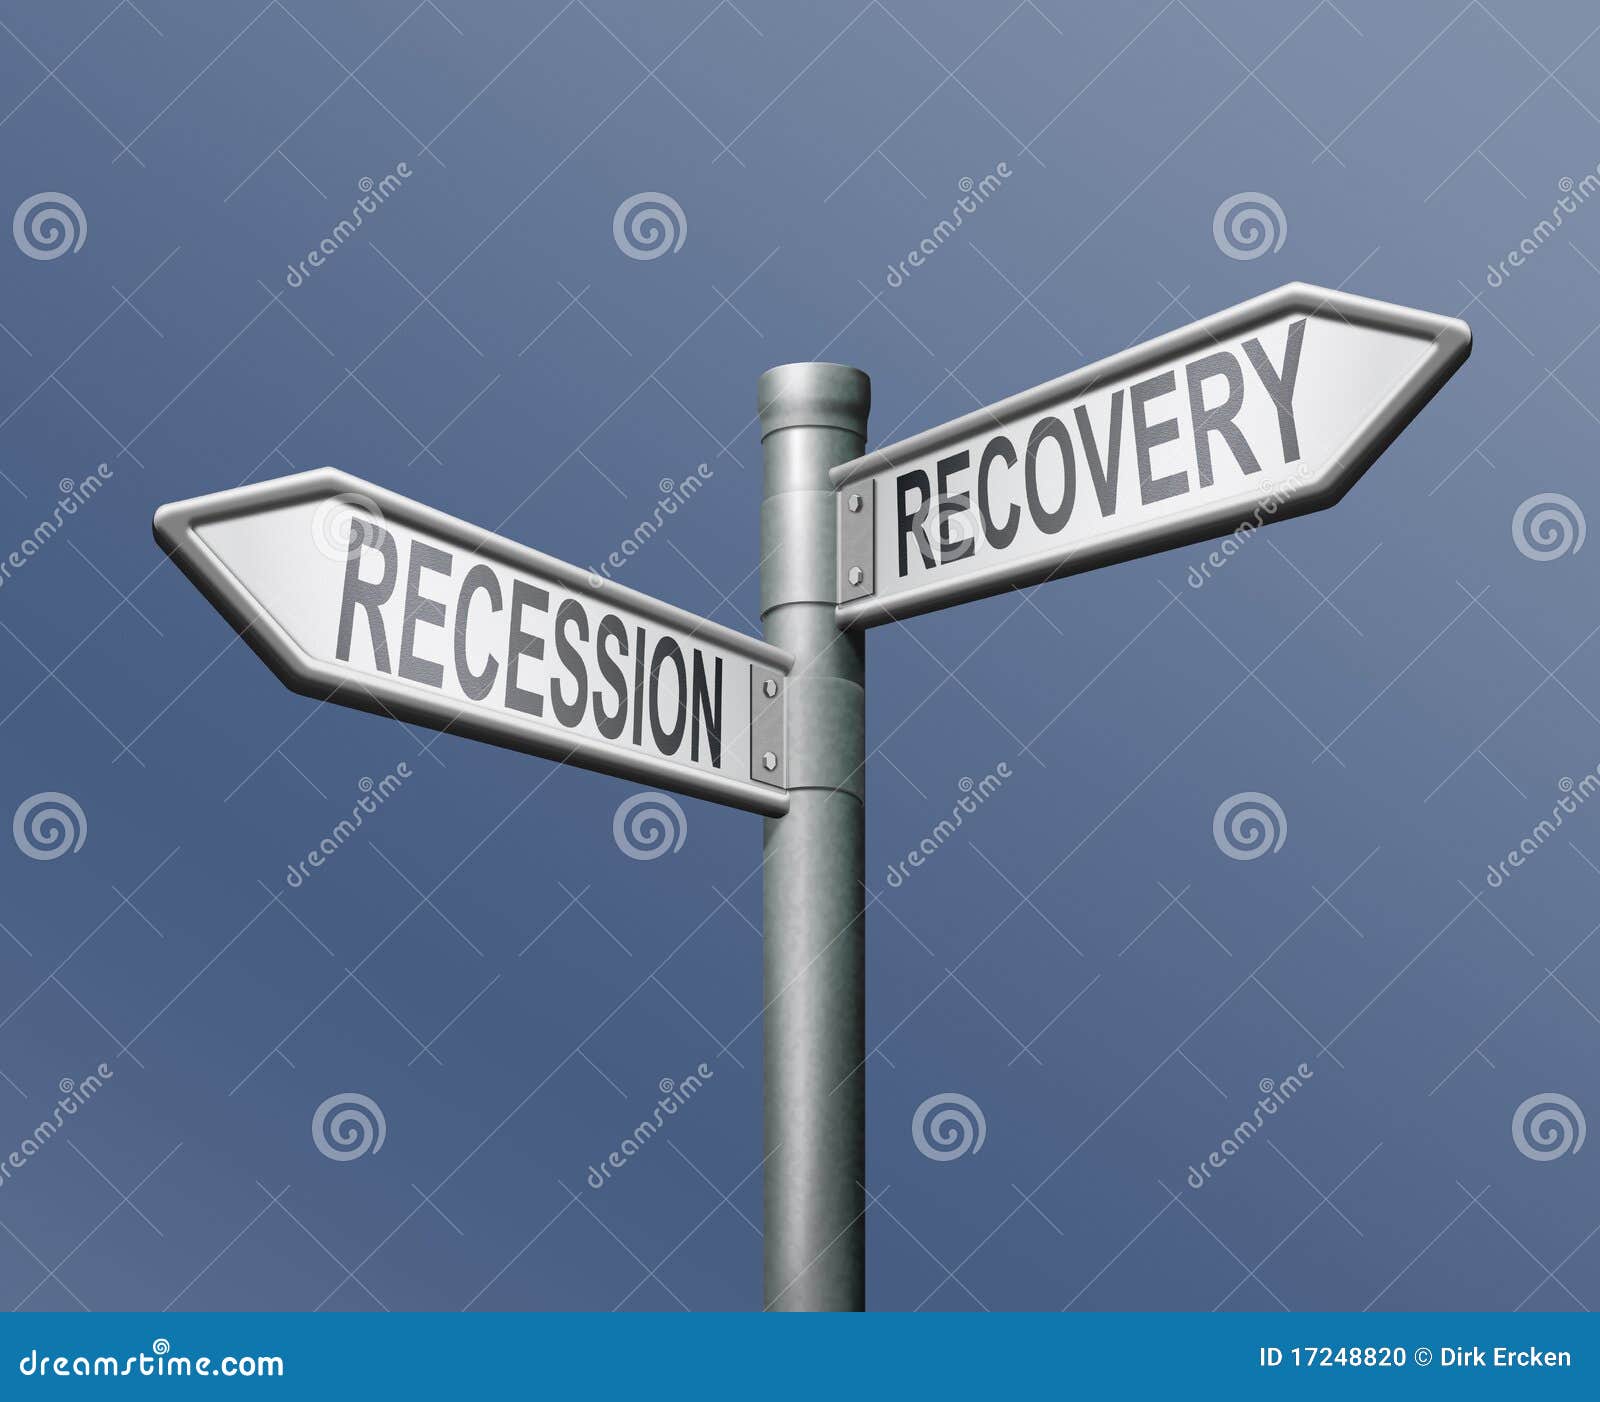 recession or recovery global crisis bank crash